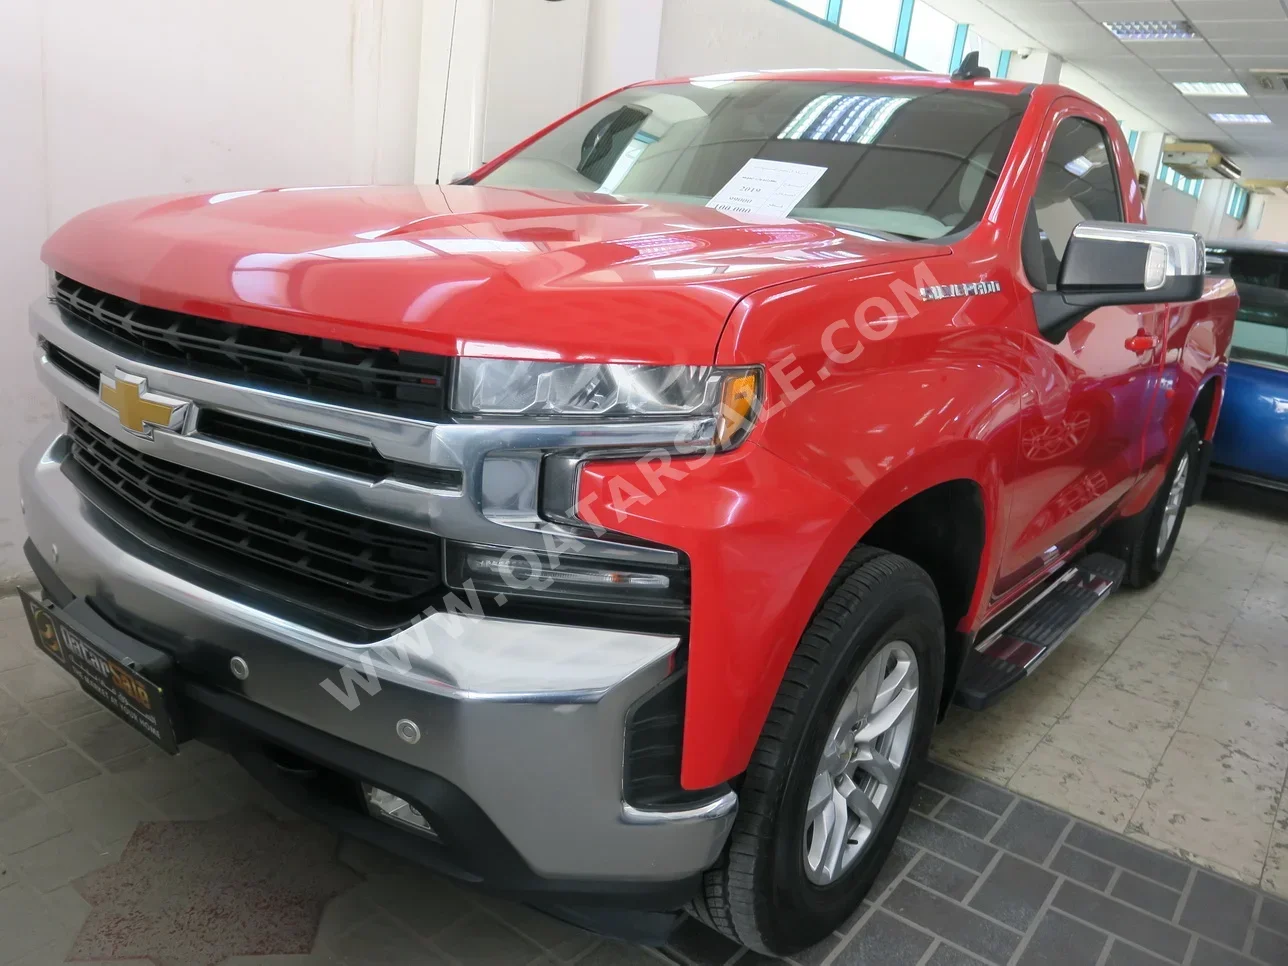 Chevrolet  Silverado  2019  Automatic  99,000 Km  8 Cylinder  Four Wheel Drive (4WD)  Pick Up  Red